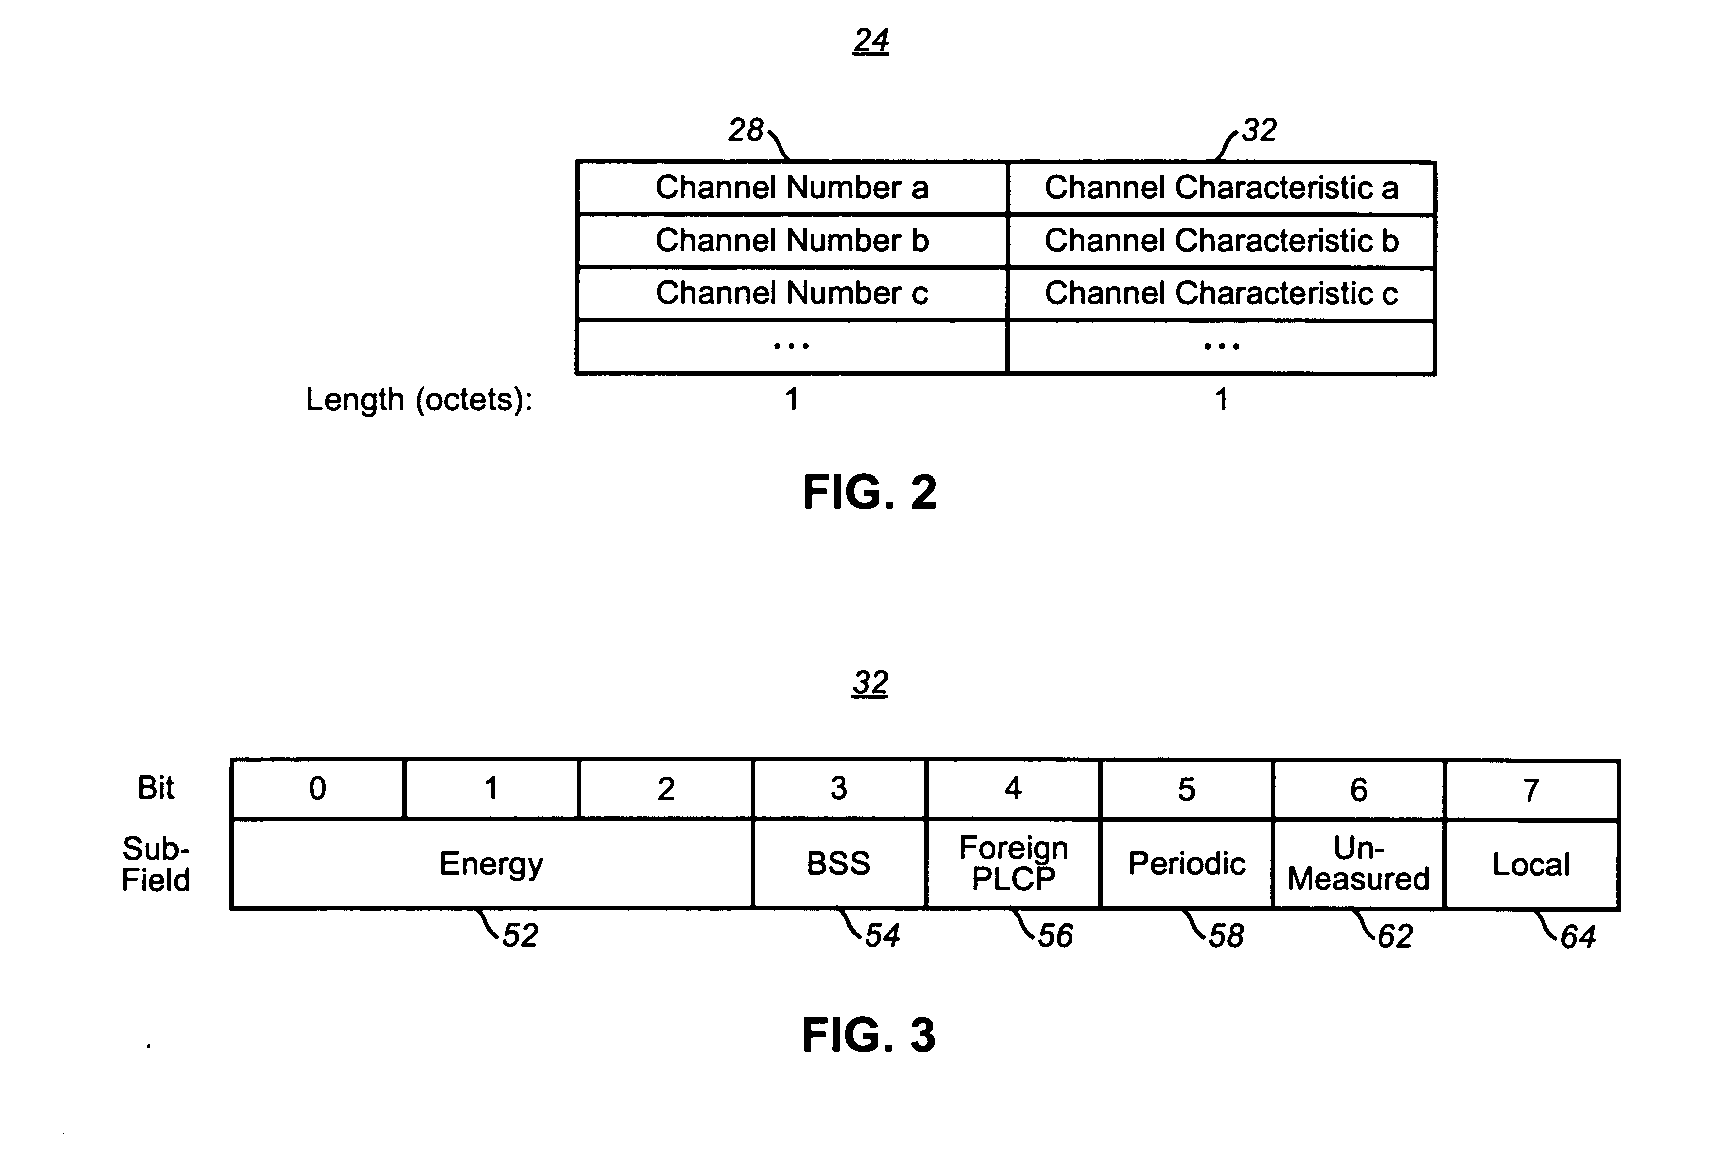 Assembly, and associated method, for facilitating channel frequecy selection in a communication system utilizing a dynamic frequency selection scheme